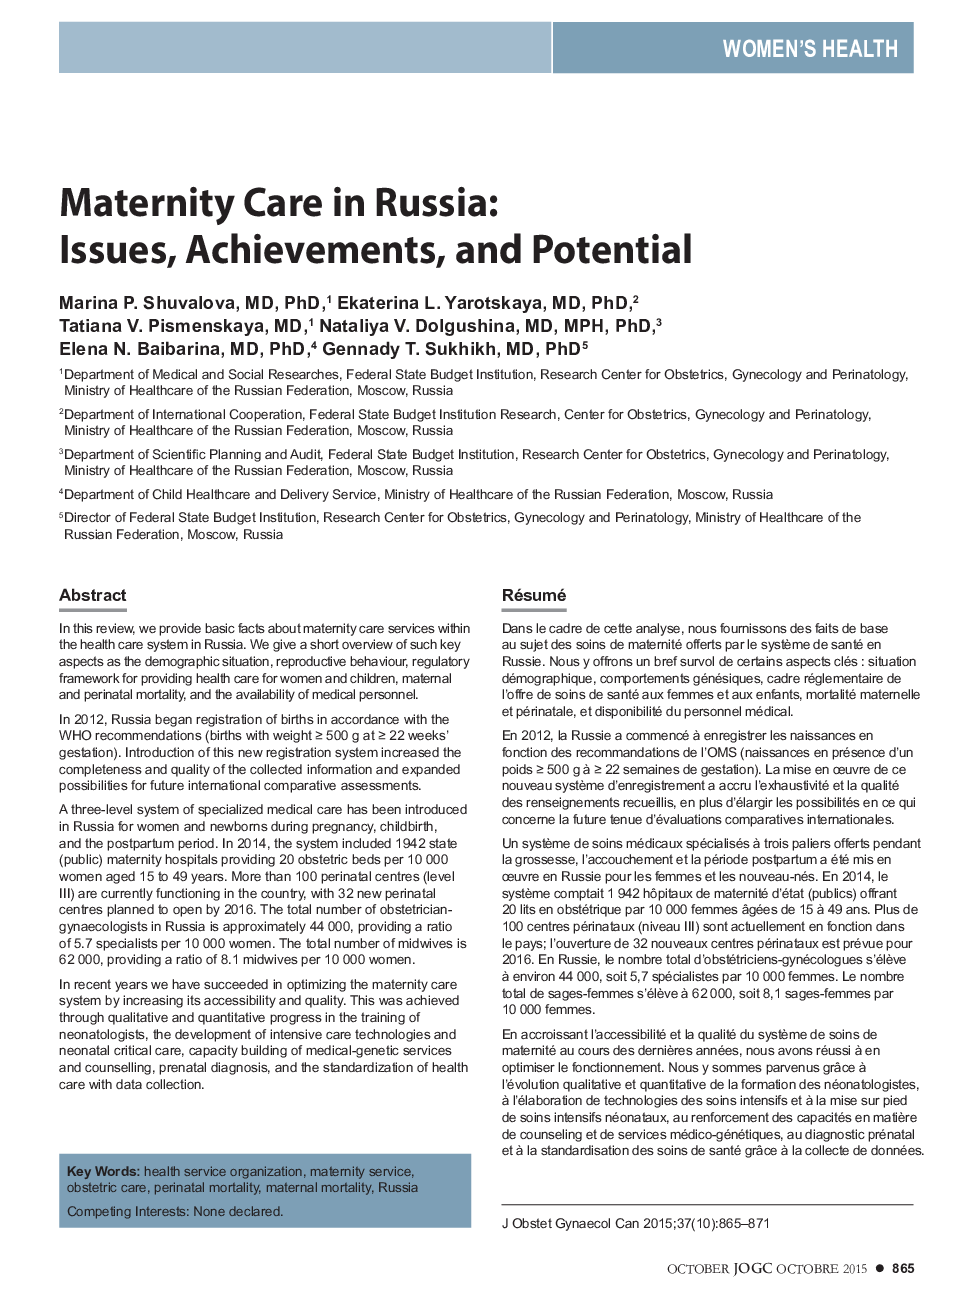 Maternity Care in Russia: Issues, Achievements, and Potential